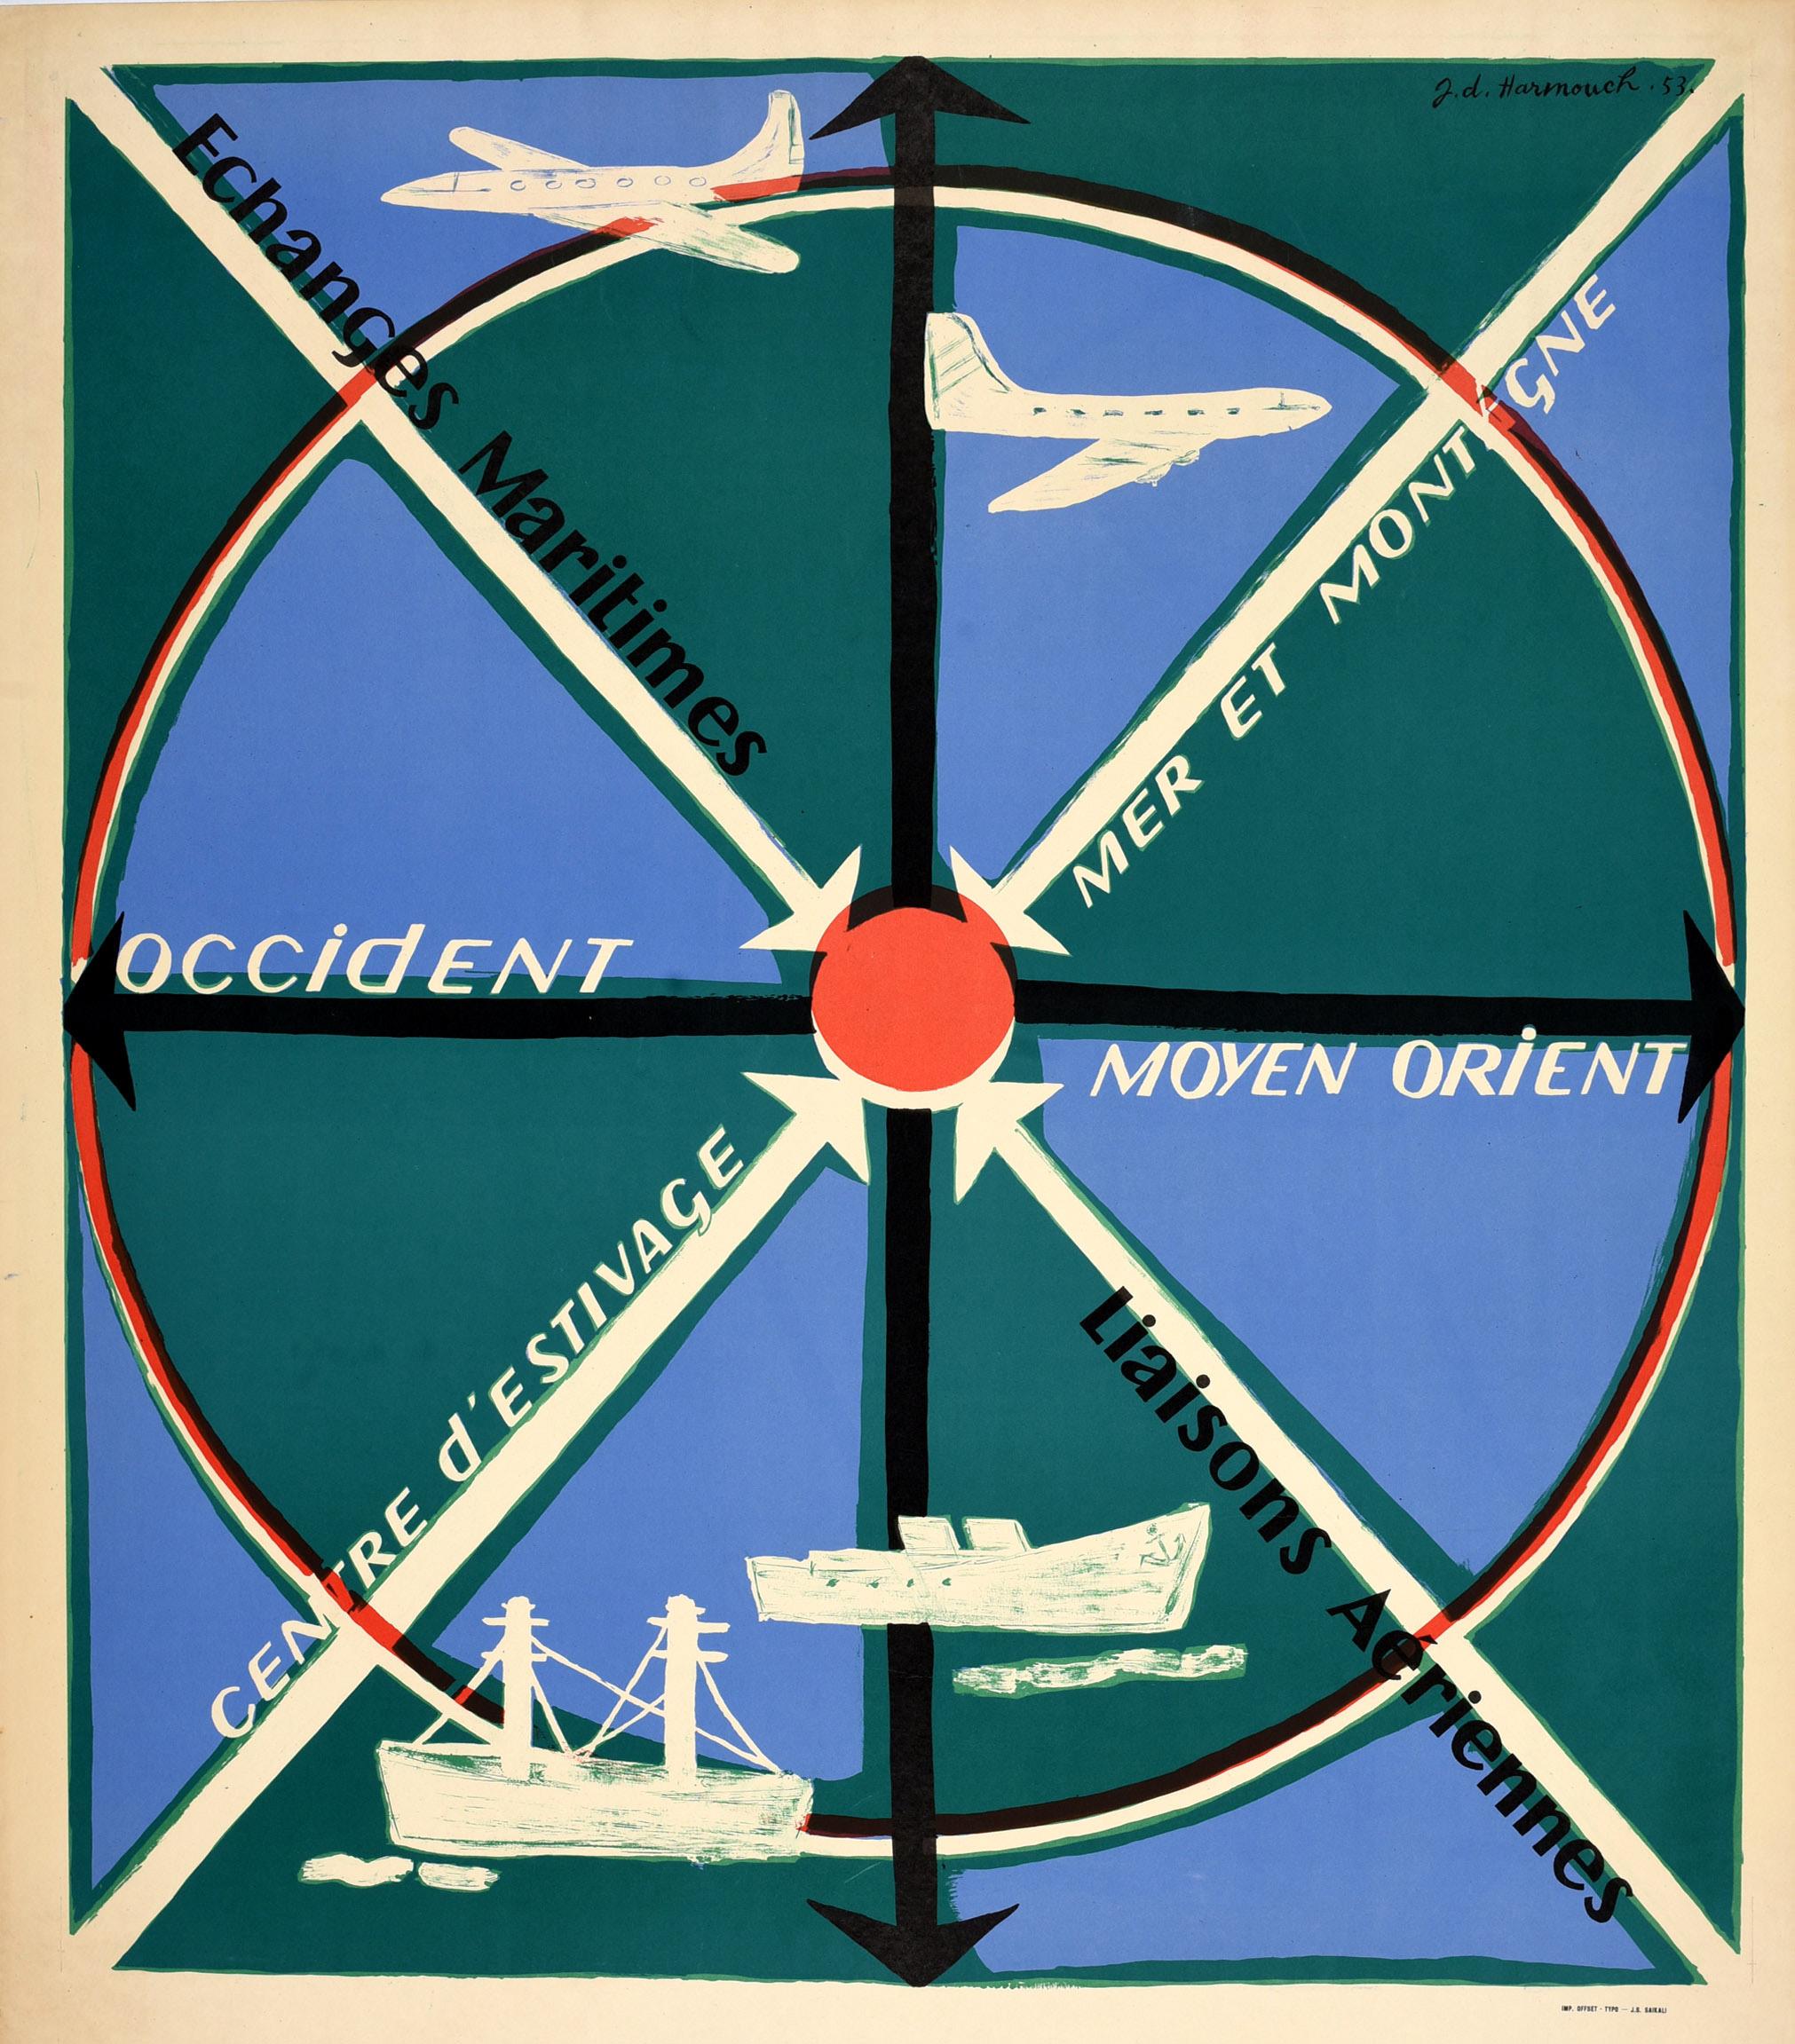 Original vintage travel poster for Beyrouth Liban / Beirut Lebanon featuring a compass design with arrows pointing to a red dot in the centre, the text promoting Maritime exchanges Sea and mountains Summer centre Air links / Echanges maritimes Mer